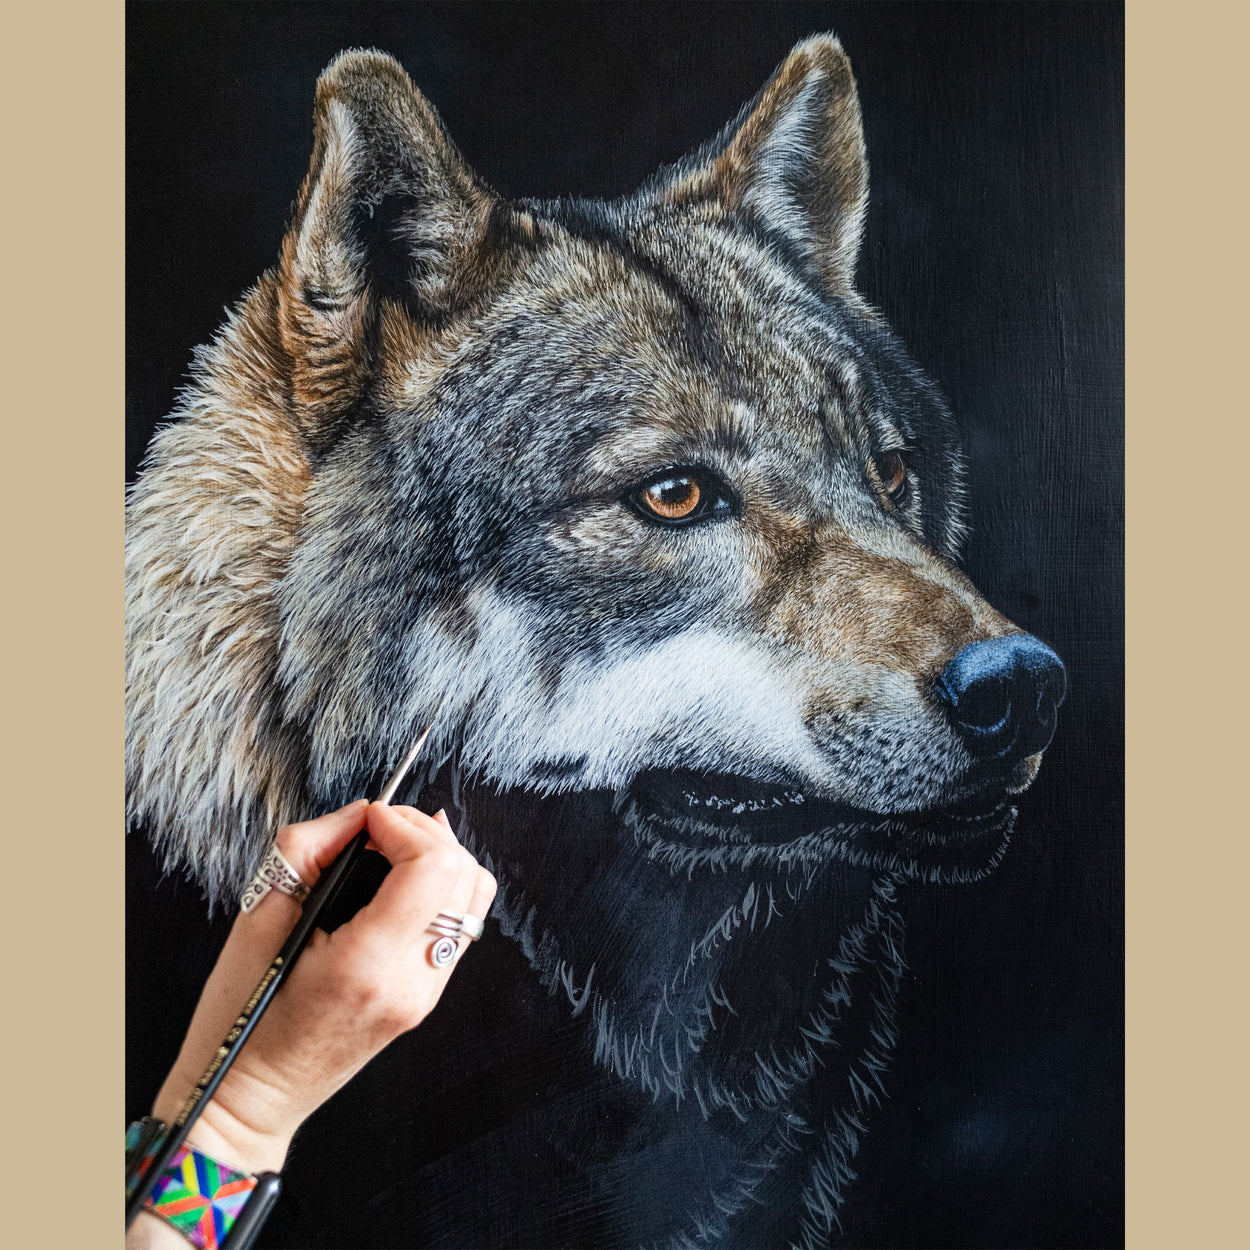 A hand holding a brush over the part-completed painting of a wolf face